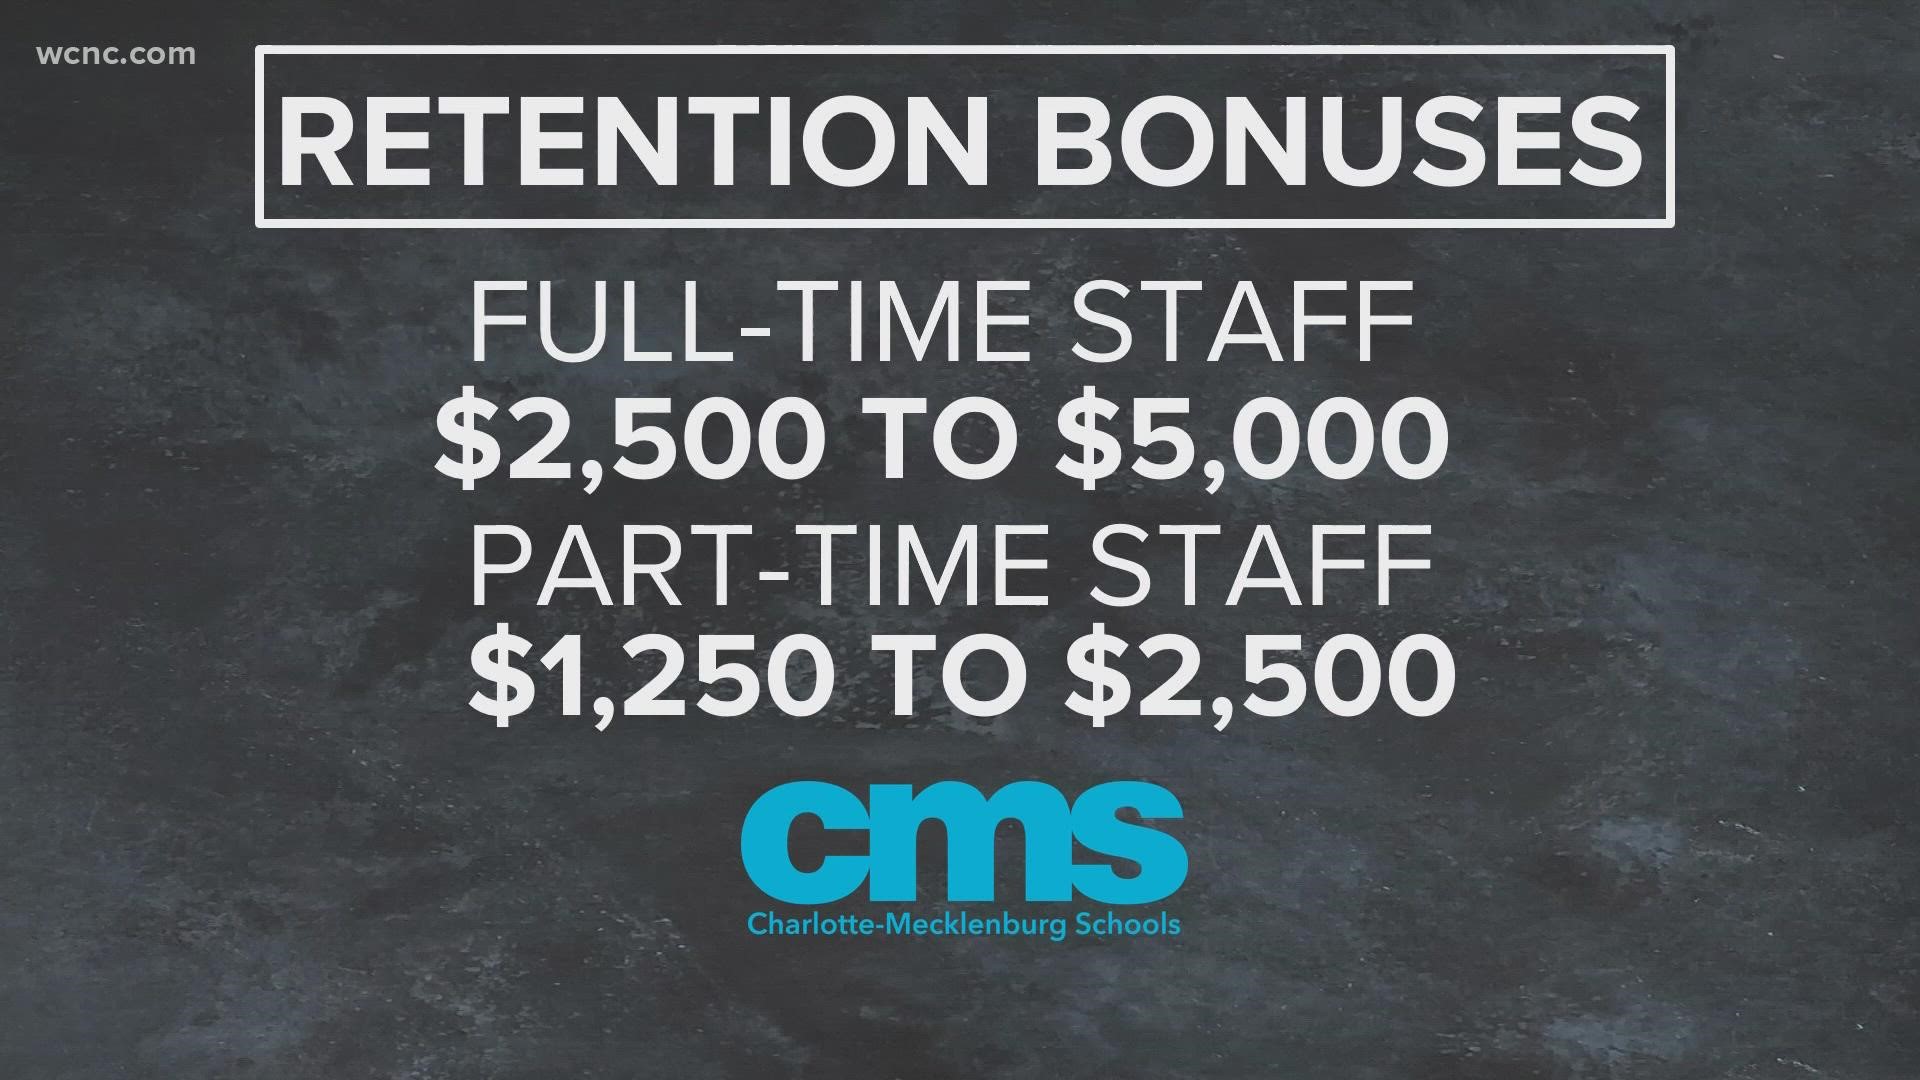 Thousands of Charlotte-Mecklenburg School employees will receive another installment of retention bonuses by the end of this month.